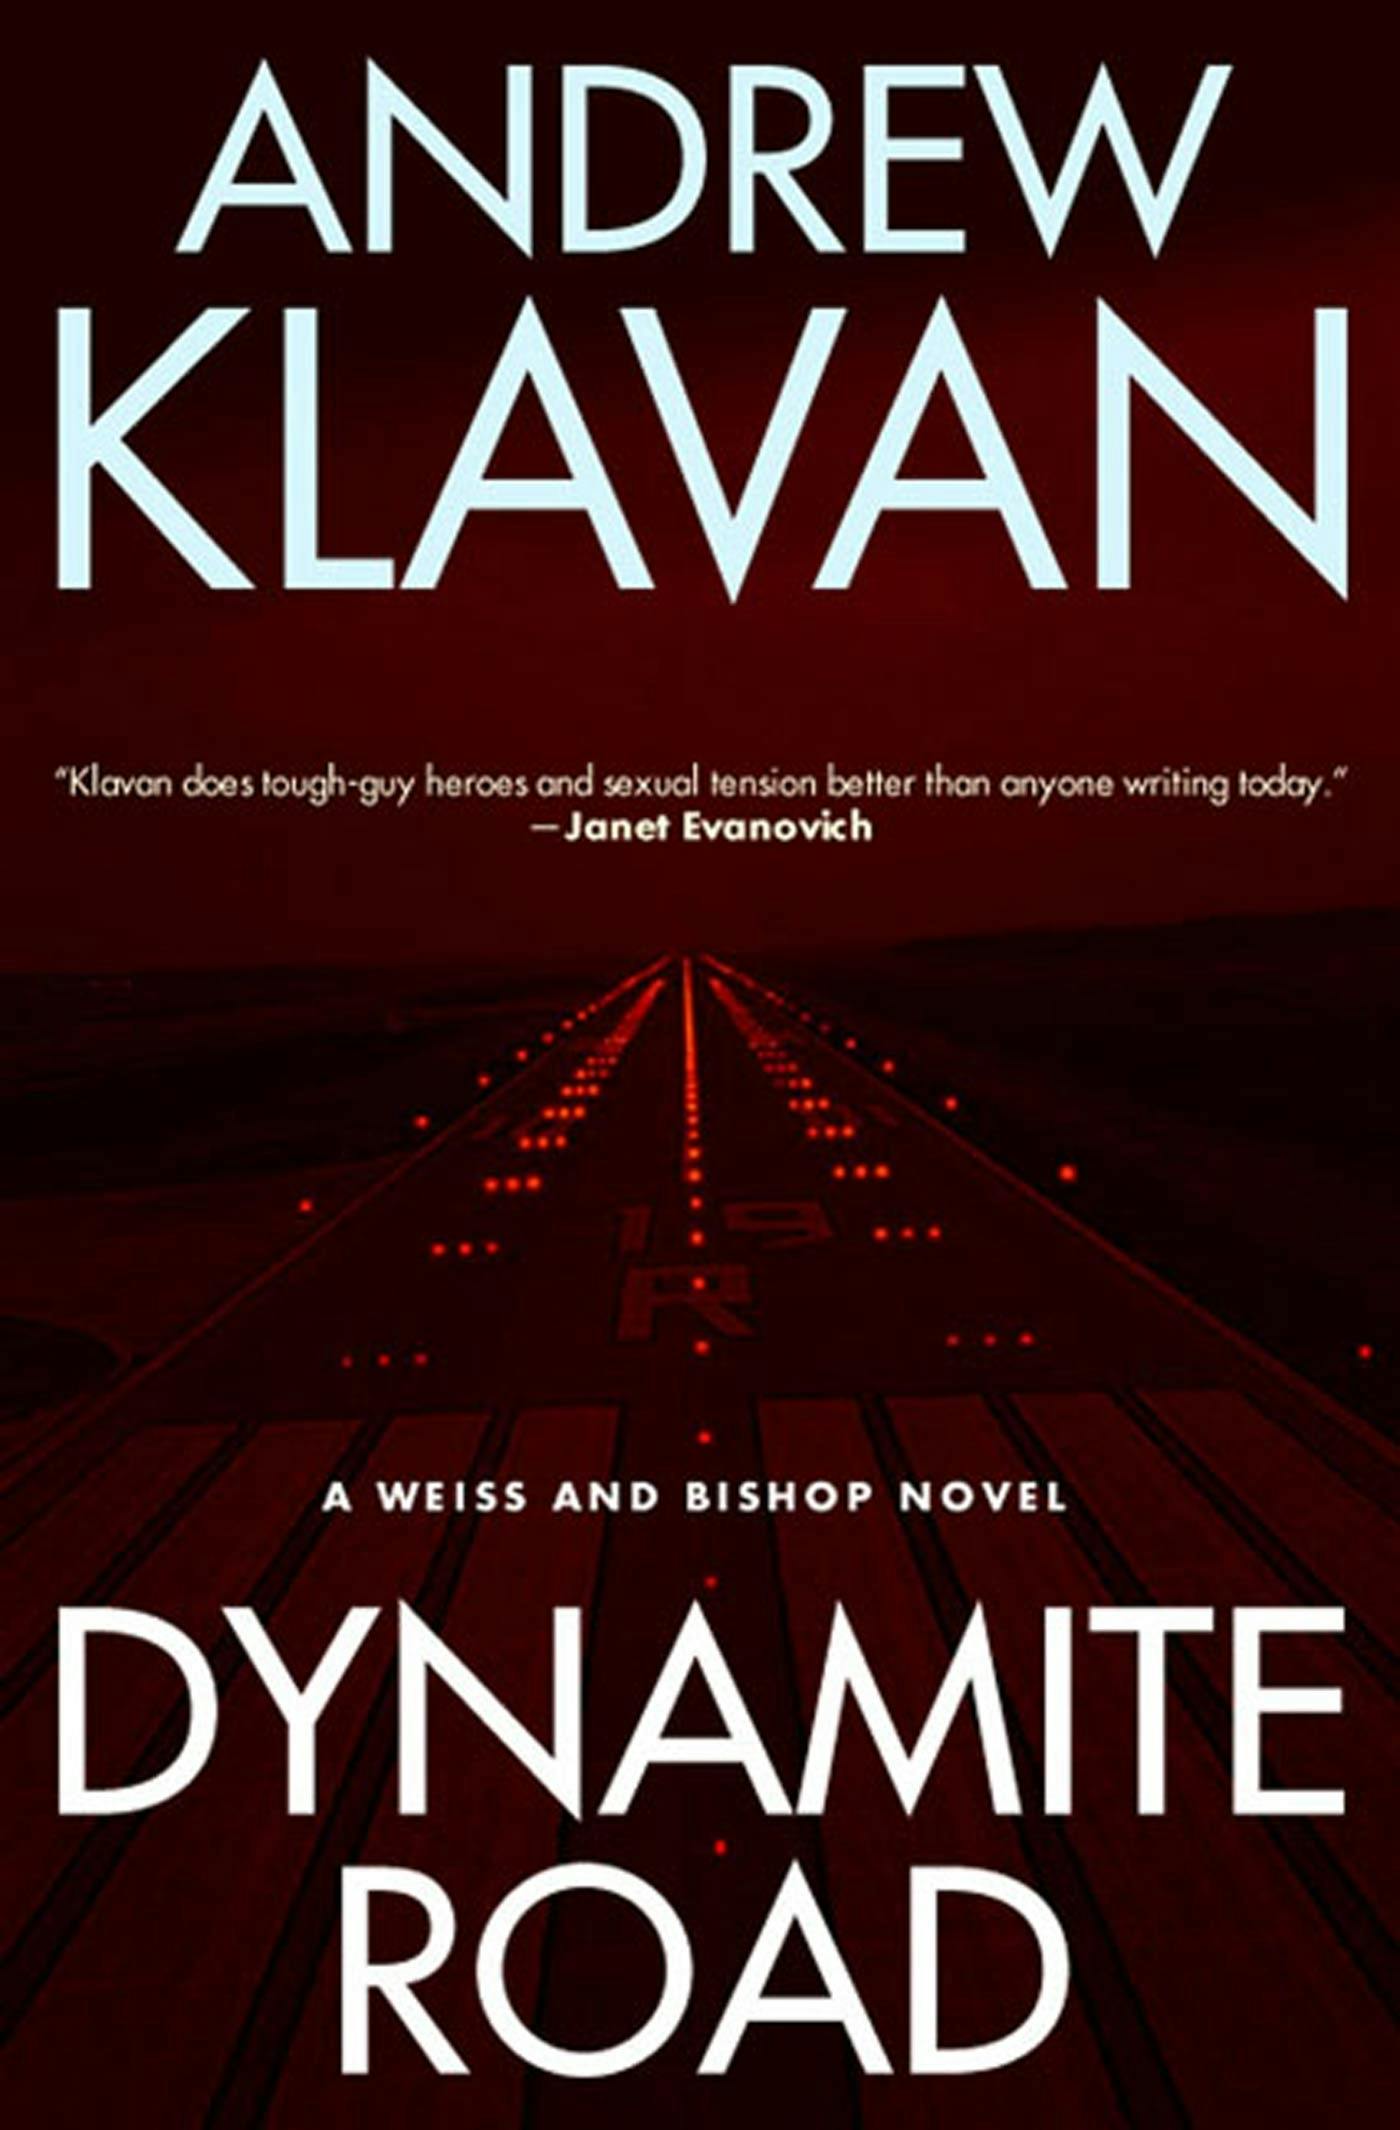 Cover for the book titled as: Dynamite Road